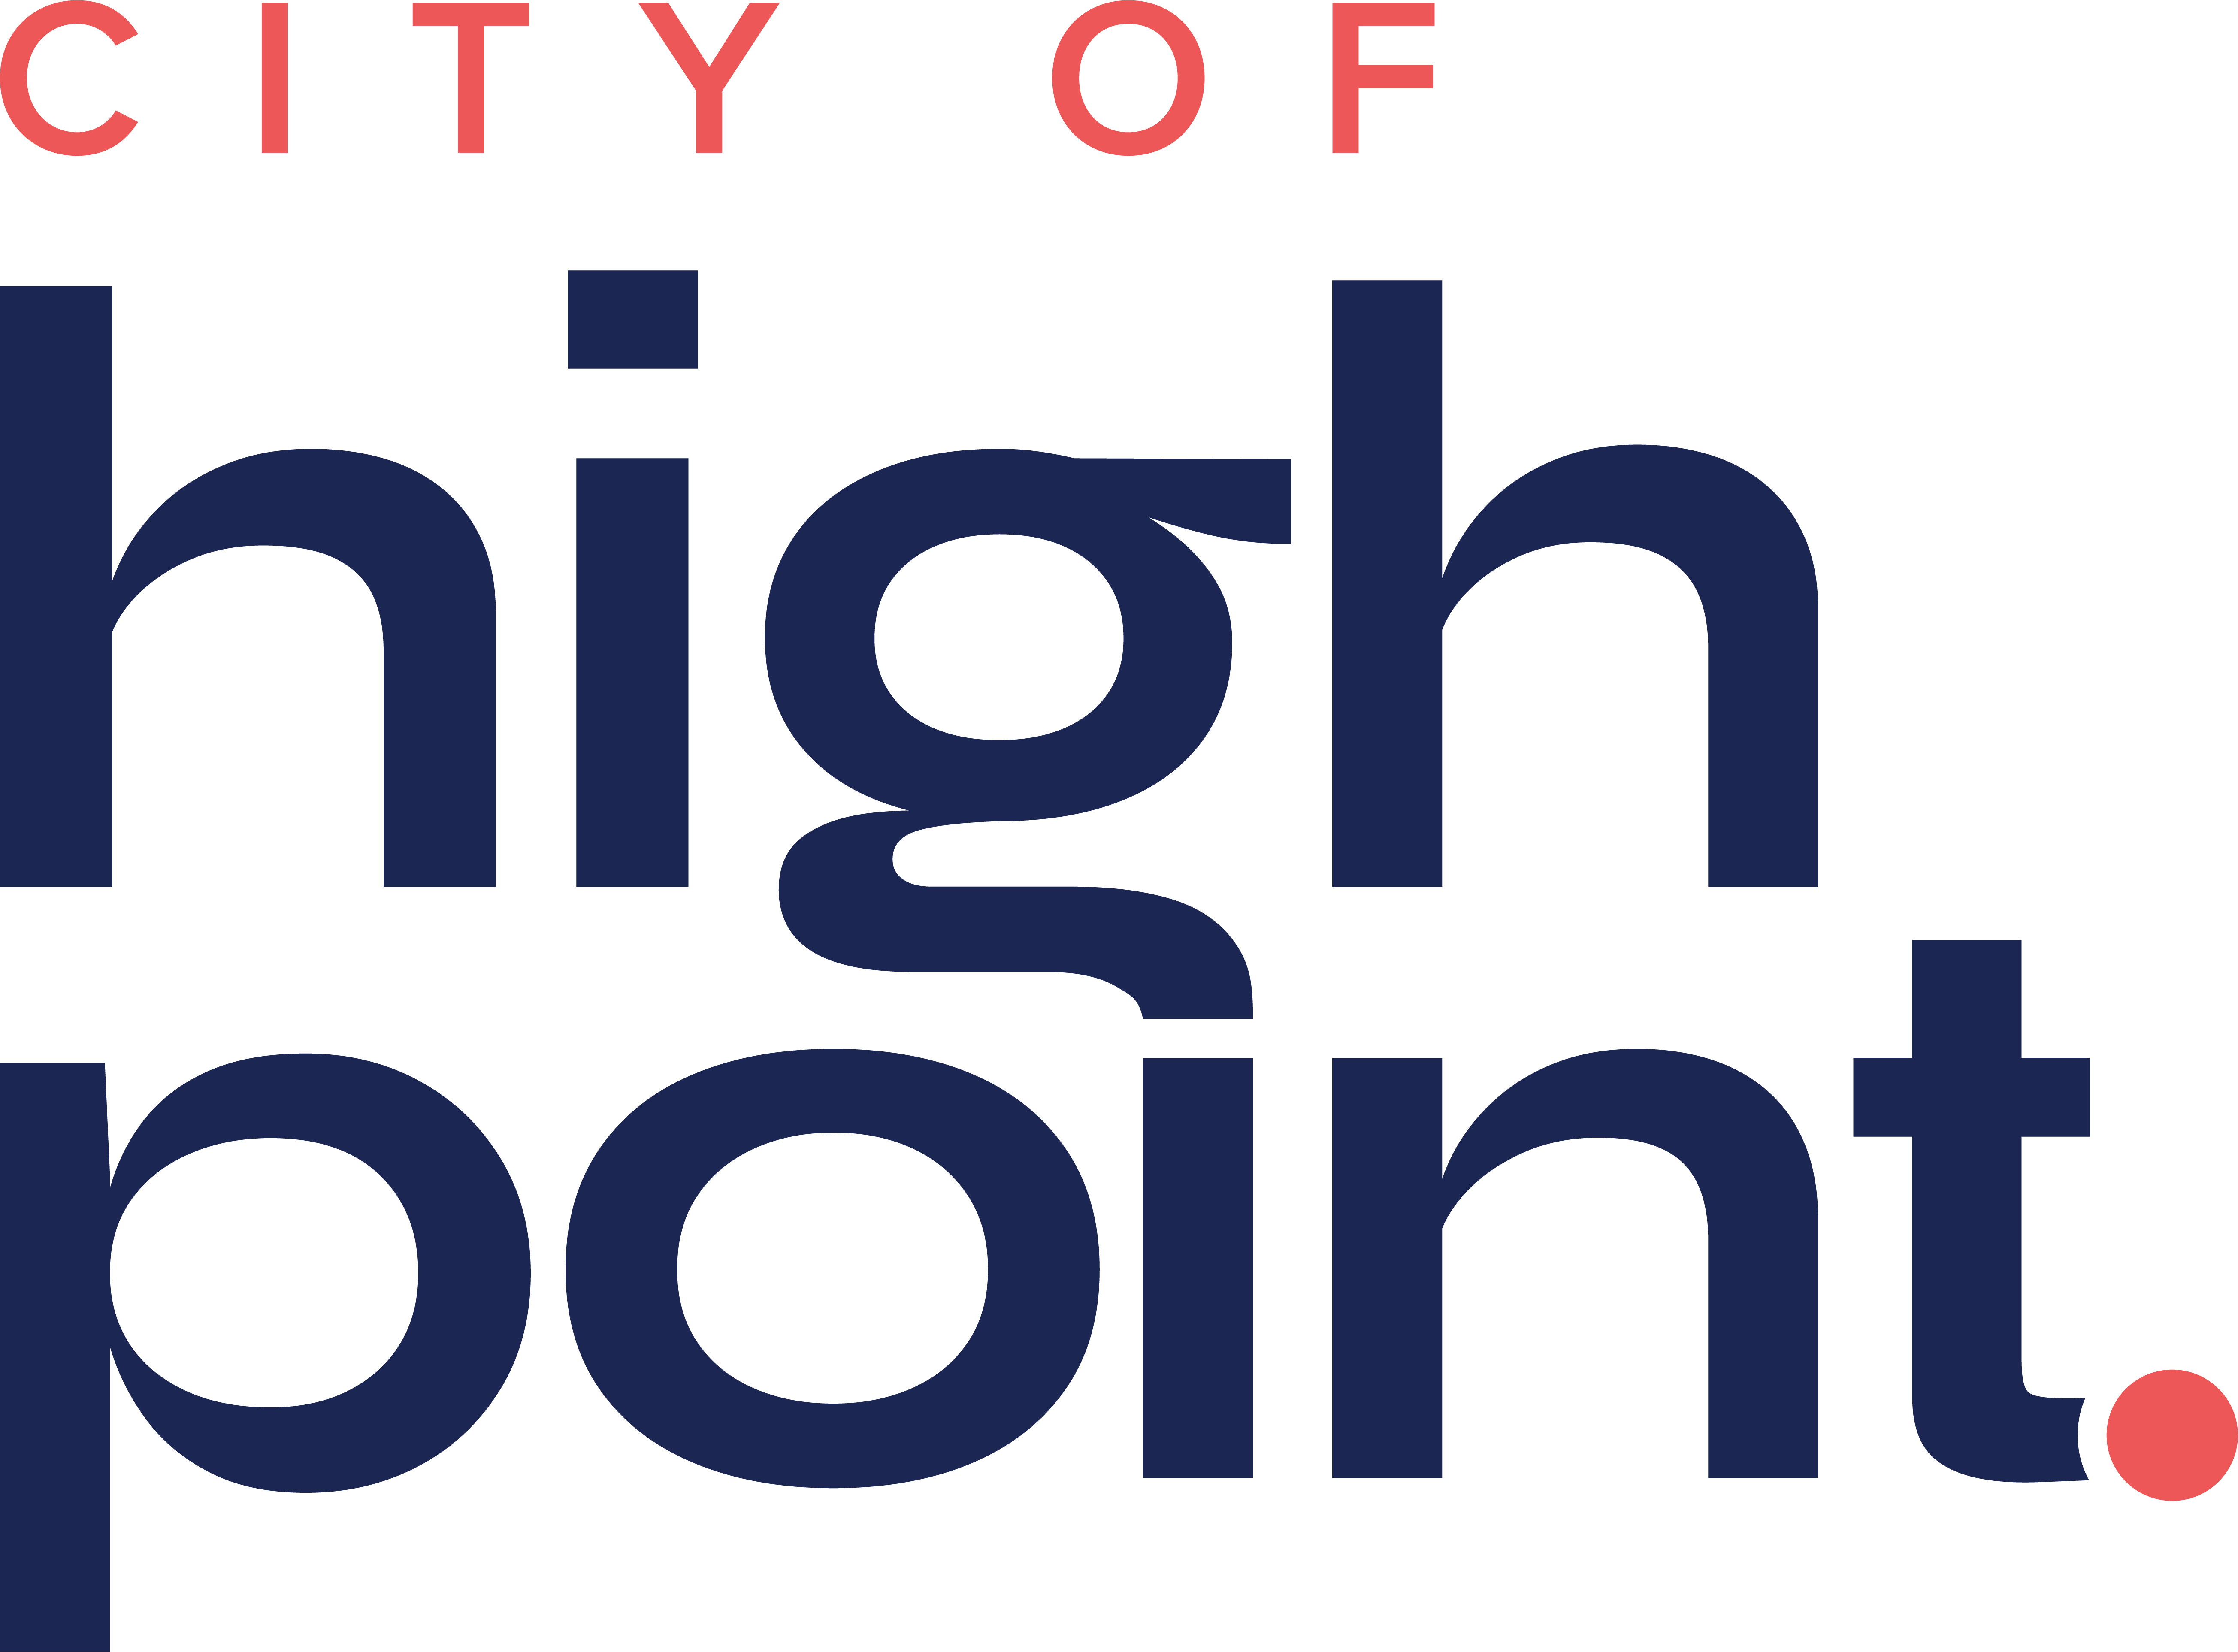 The City of High Point's new logo.